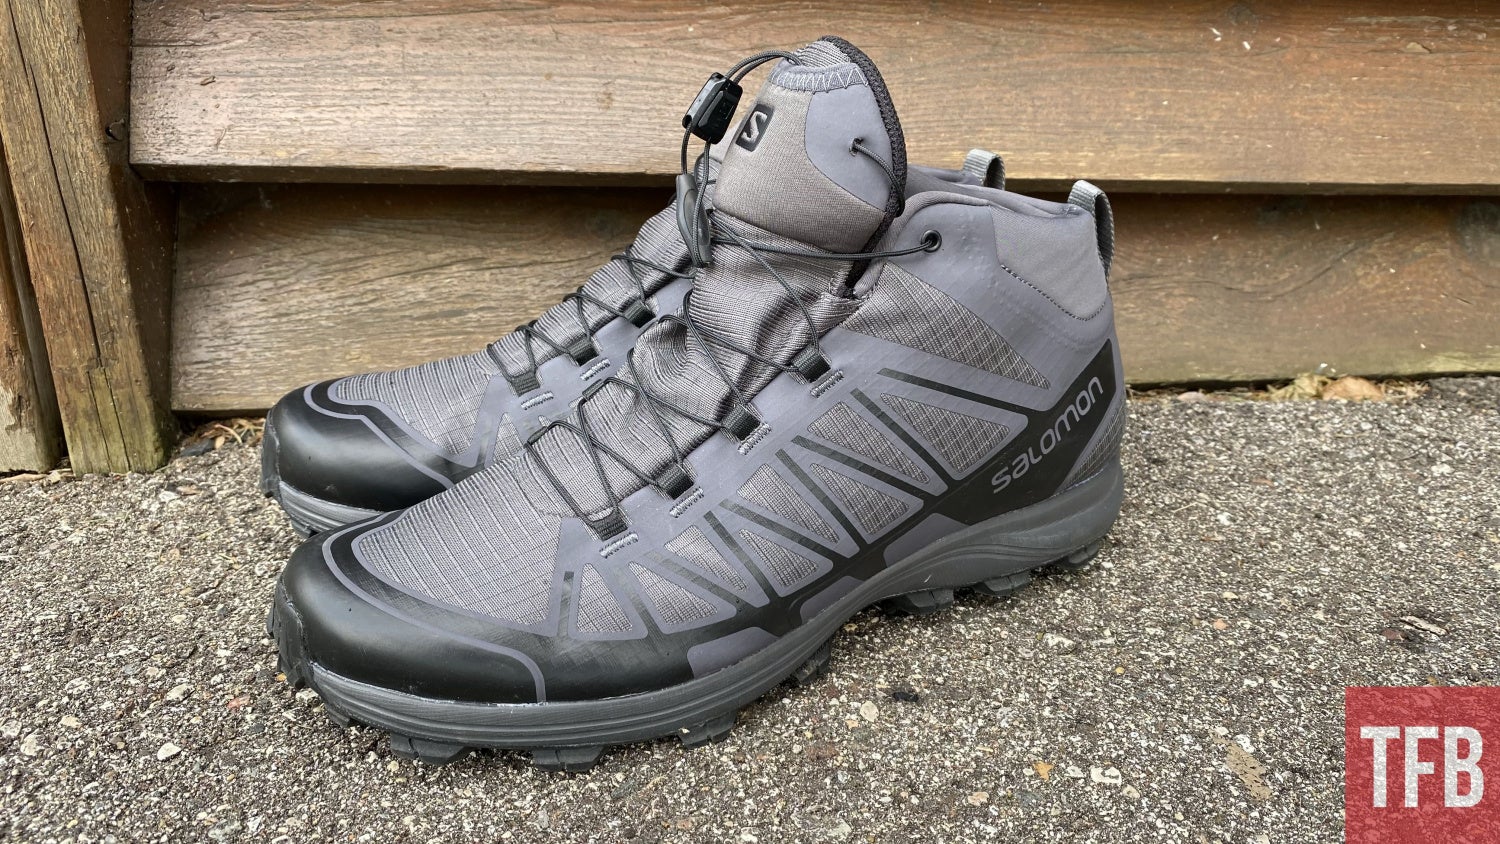 paperback hire perspective TFB Review: Salomon's New Speed Assault 2 BootsThe Firearm Blog